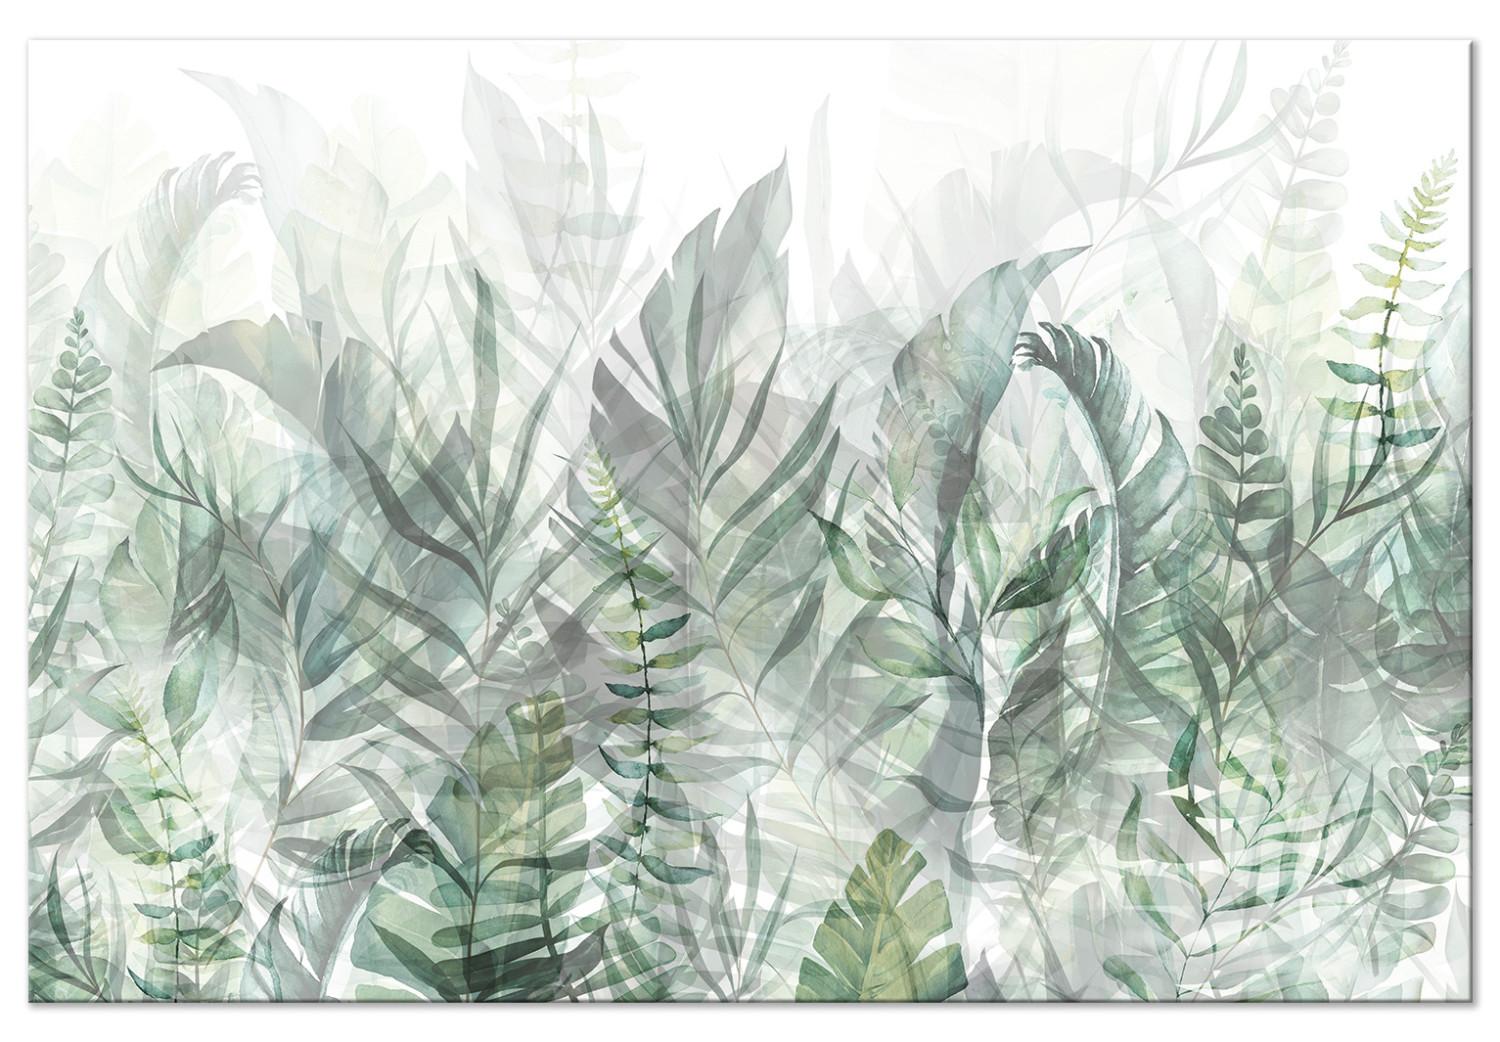 Cuadro Wild Meadow - Lush Vegetation Interpenetrating on a White Background